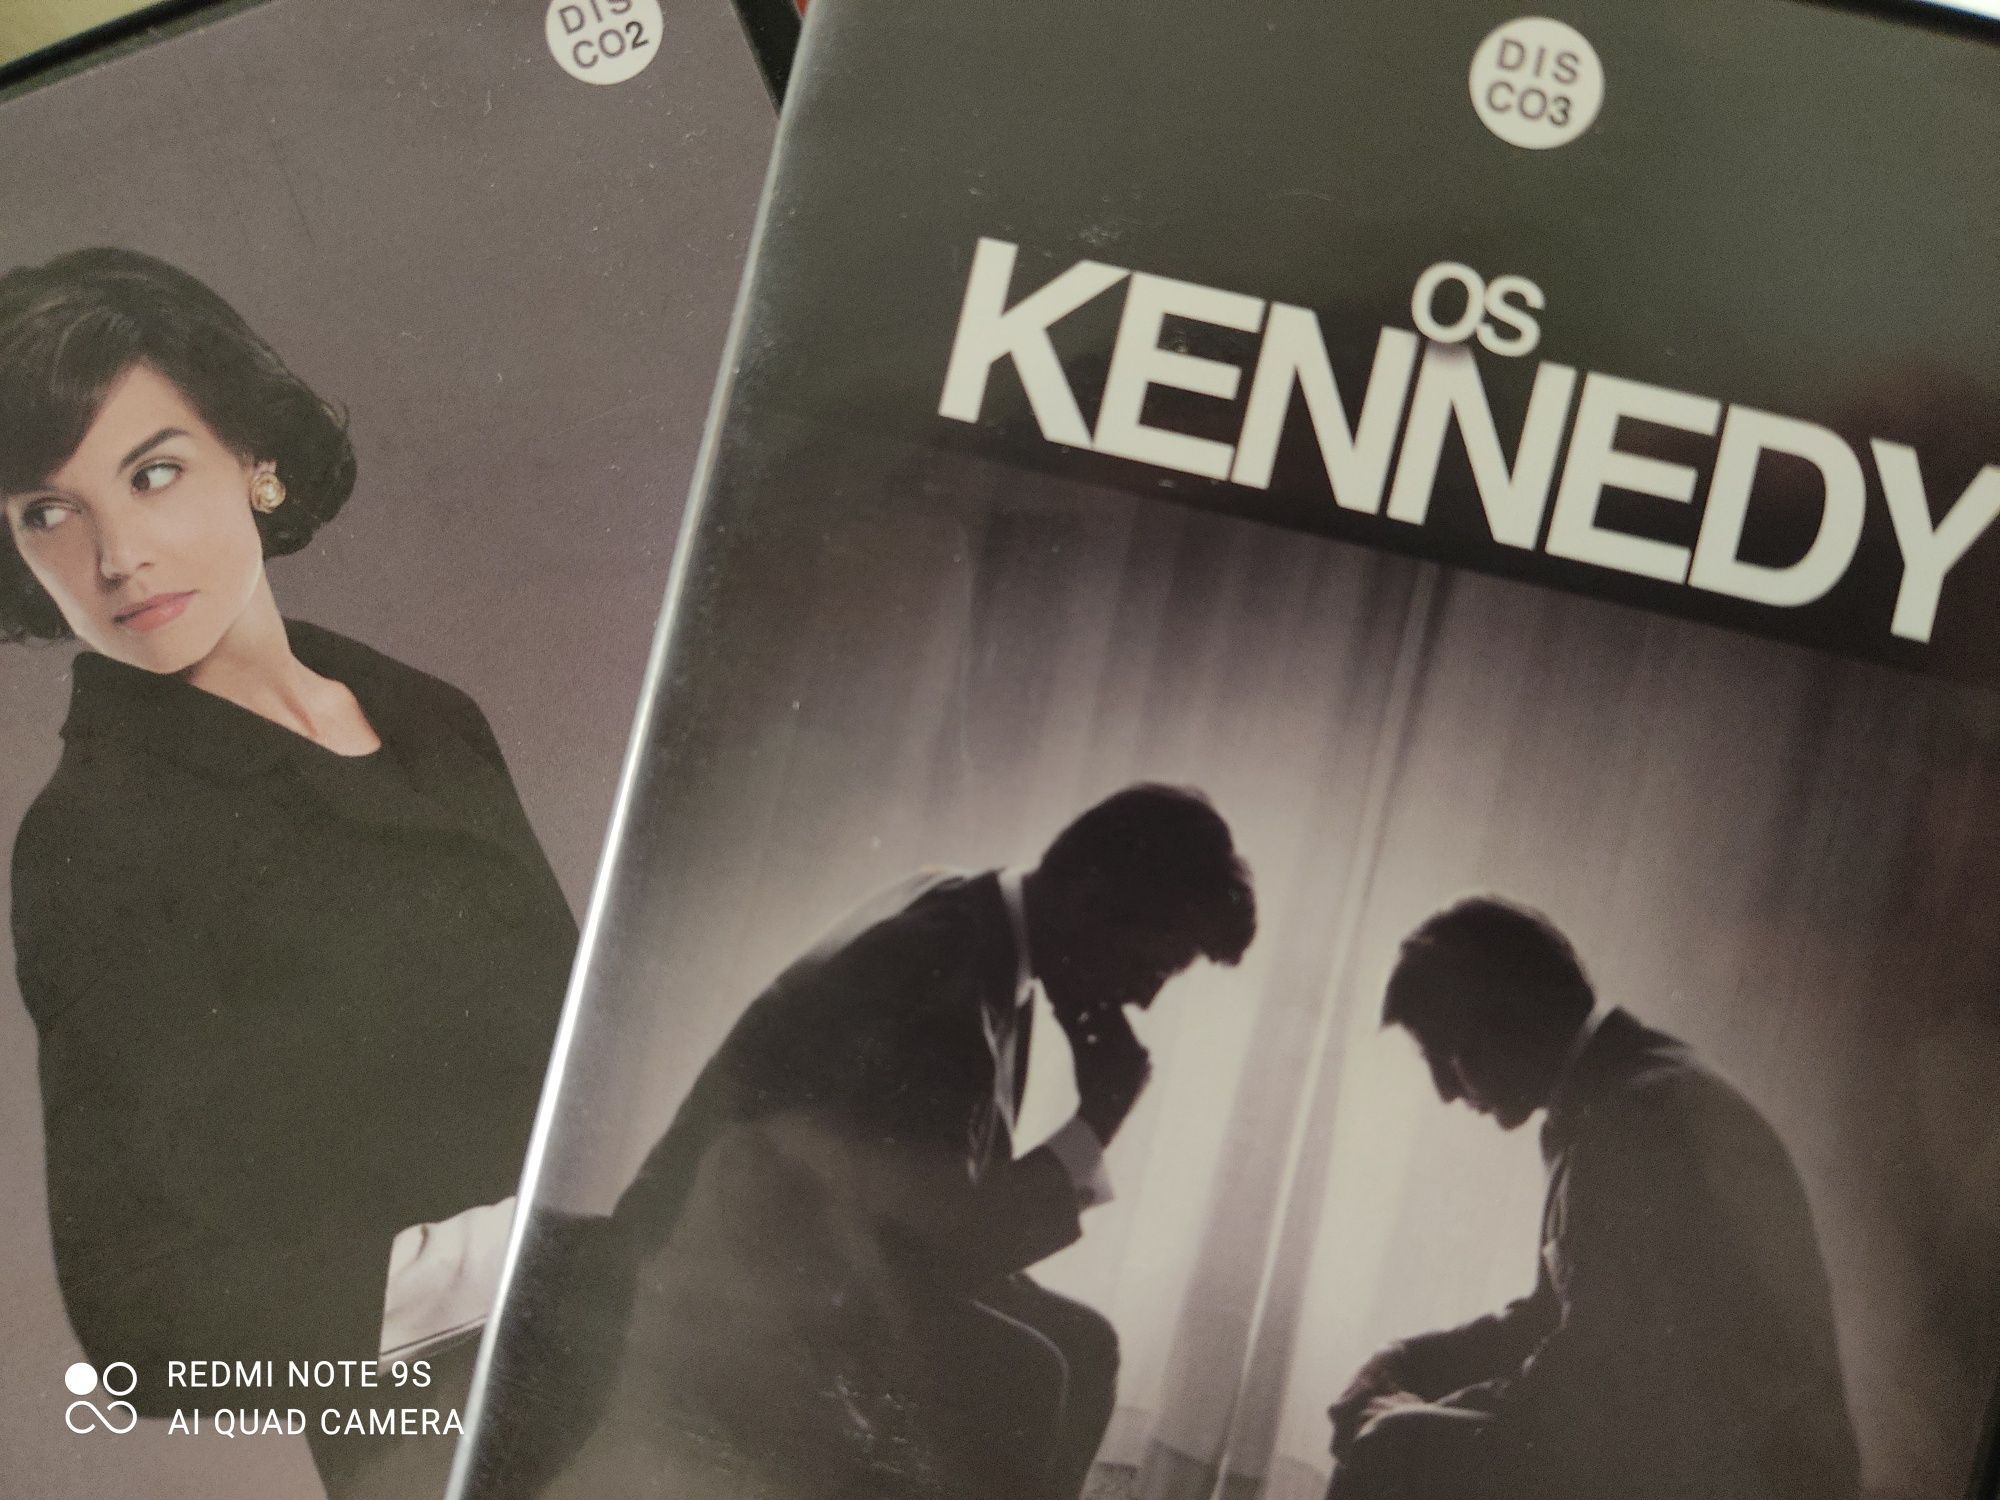 Pack Série Os Kennedy 2+3 DVDs